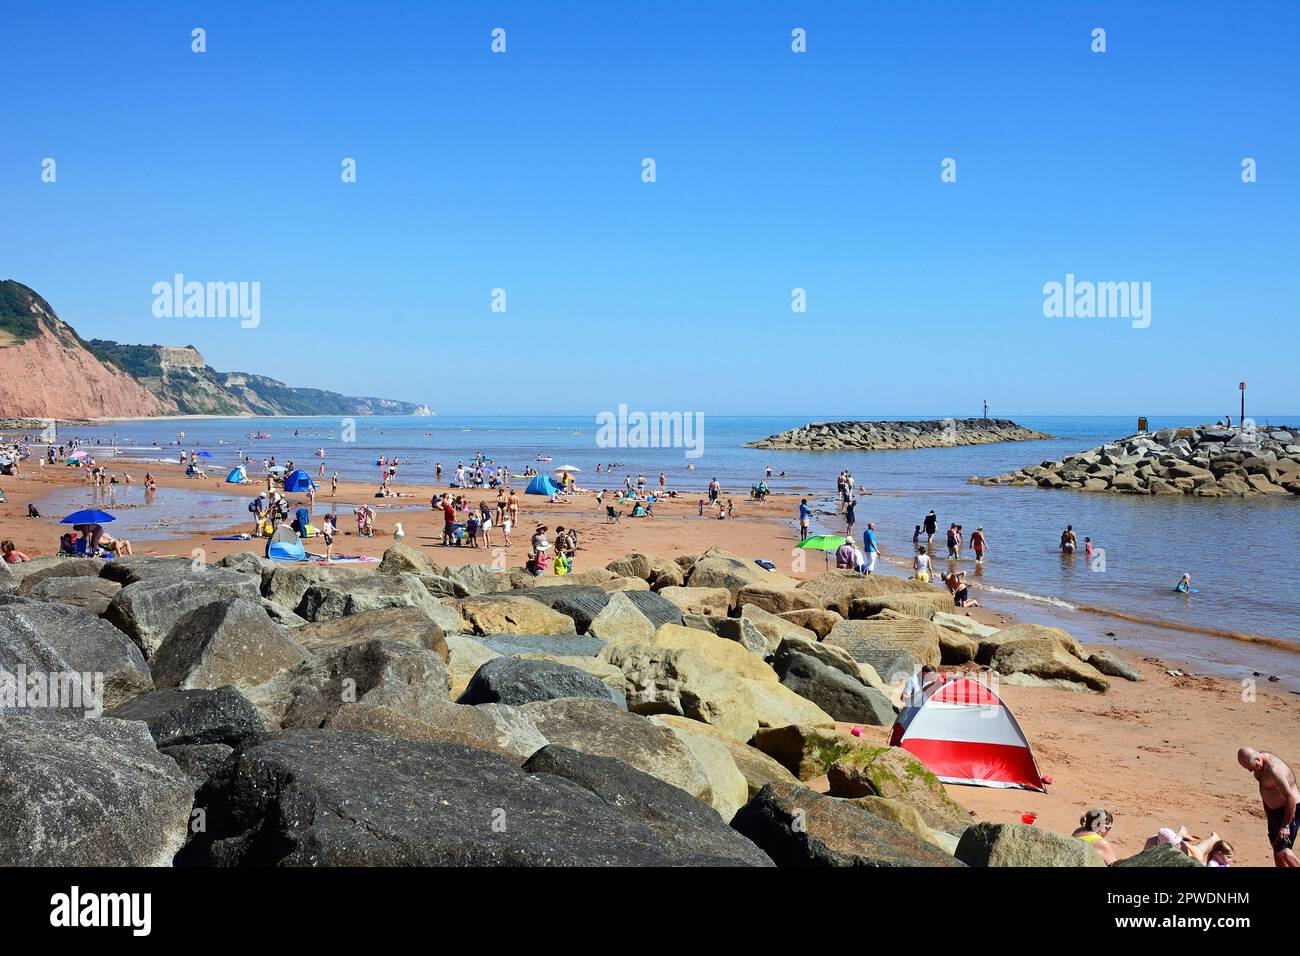 Tourists relaxing on the beach with views towards the cliffs at Pennington Point, Sidmouth, Devon, UK, Europe. Stock Photo